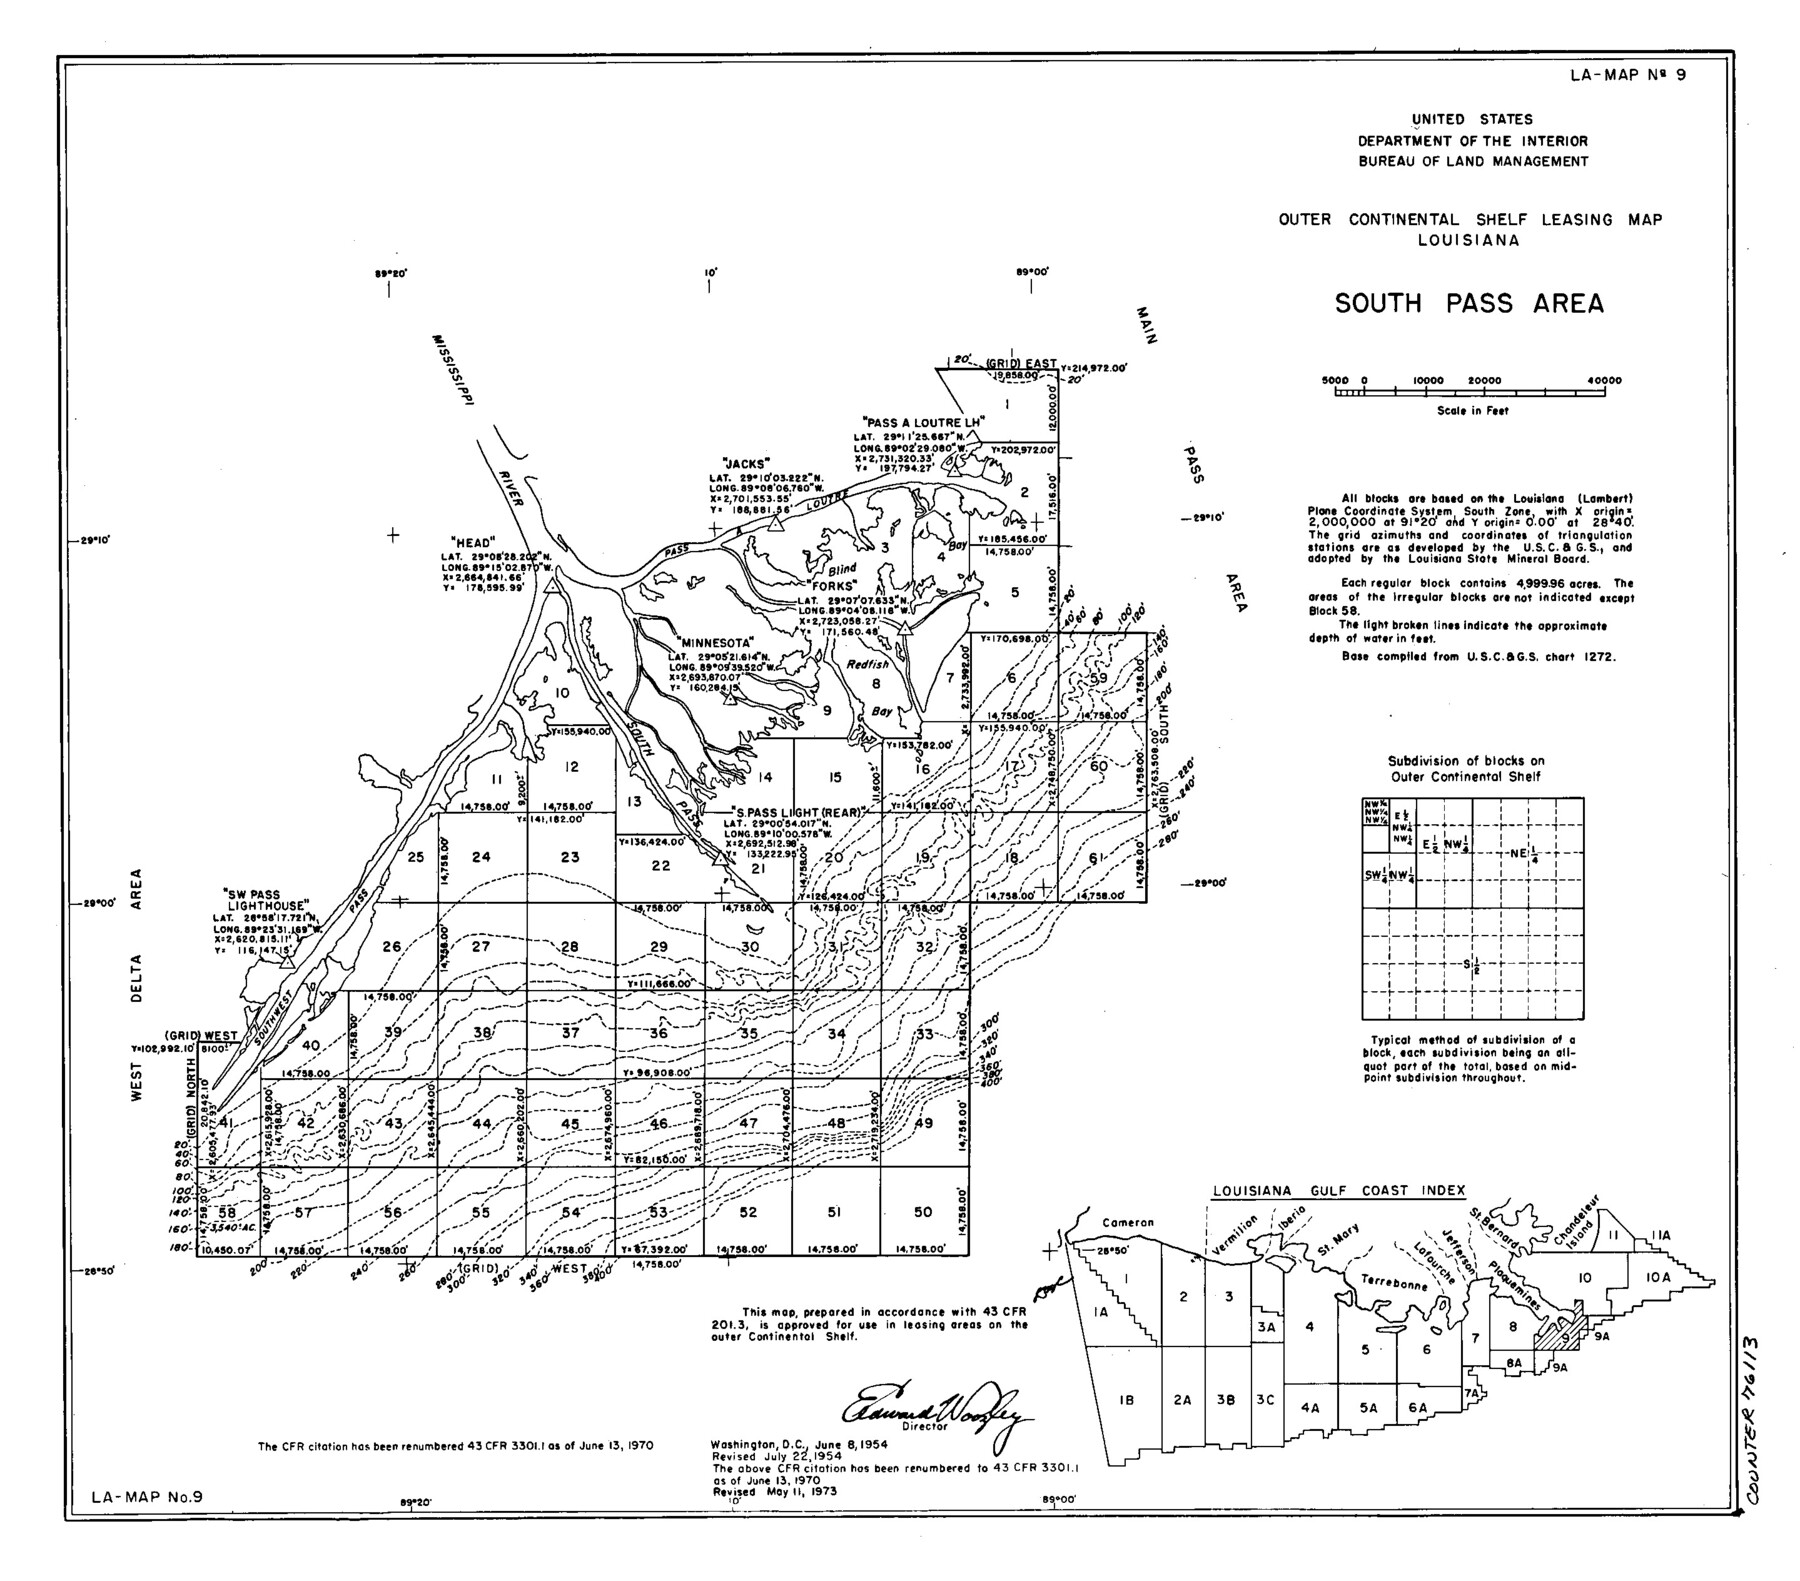 76113, Outer Continental Shelf Leasing Maps (Louisiana Offshore Operations), General Map Collection